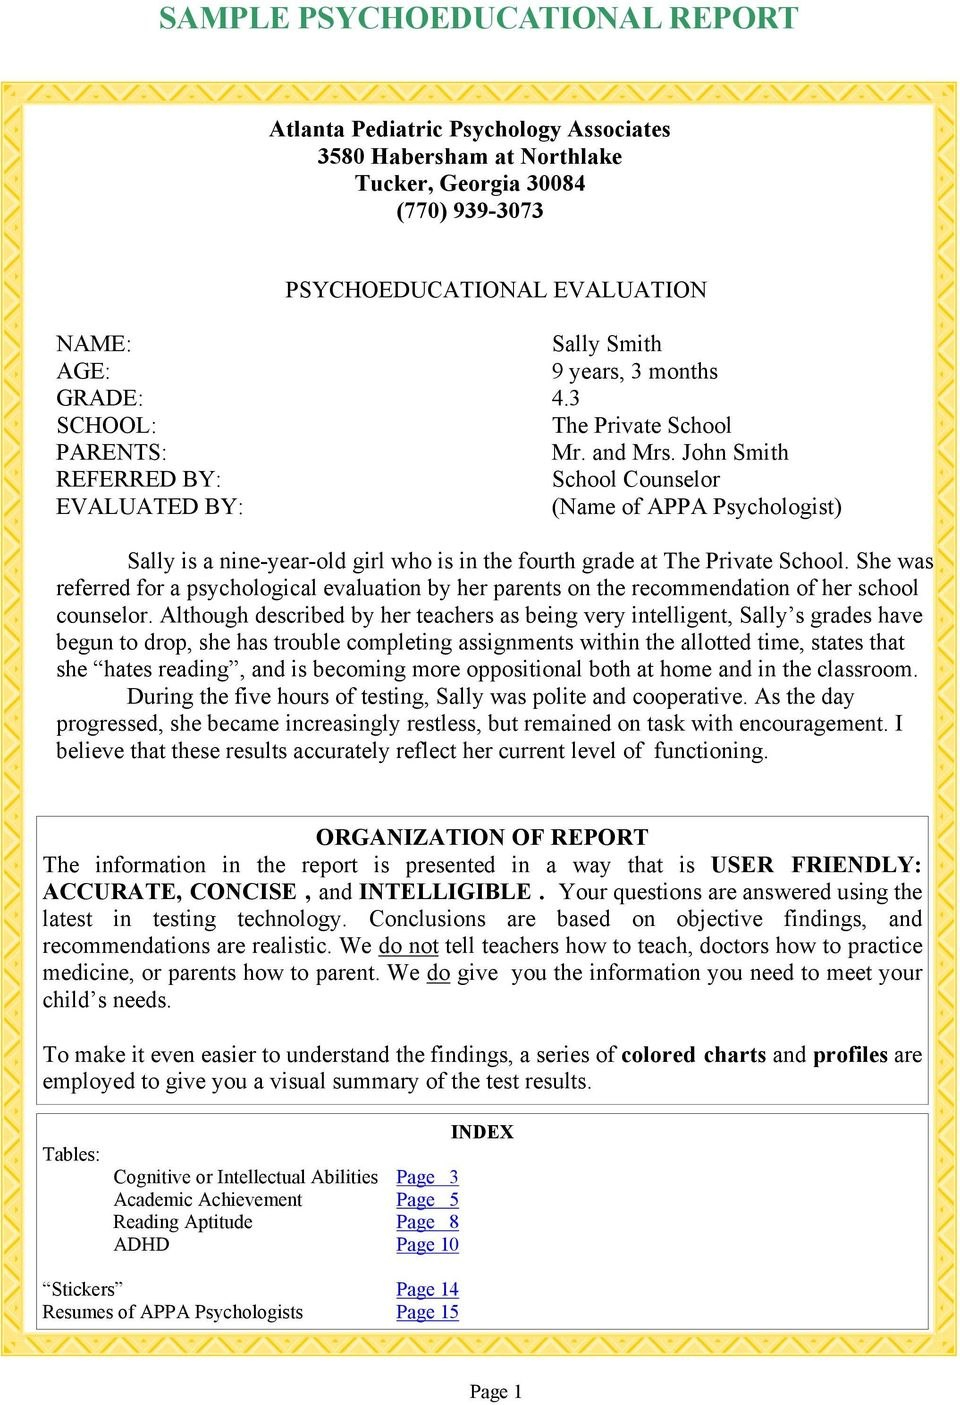 Sample Psychoeducational Report  Pdf with Psychoeducational Report Template